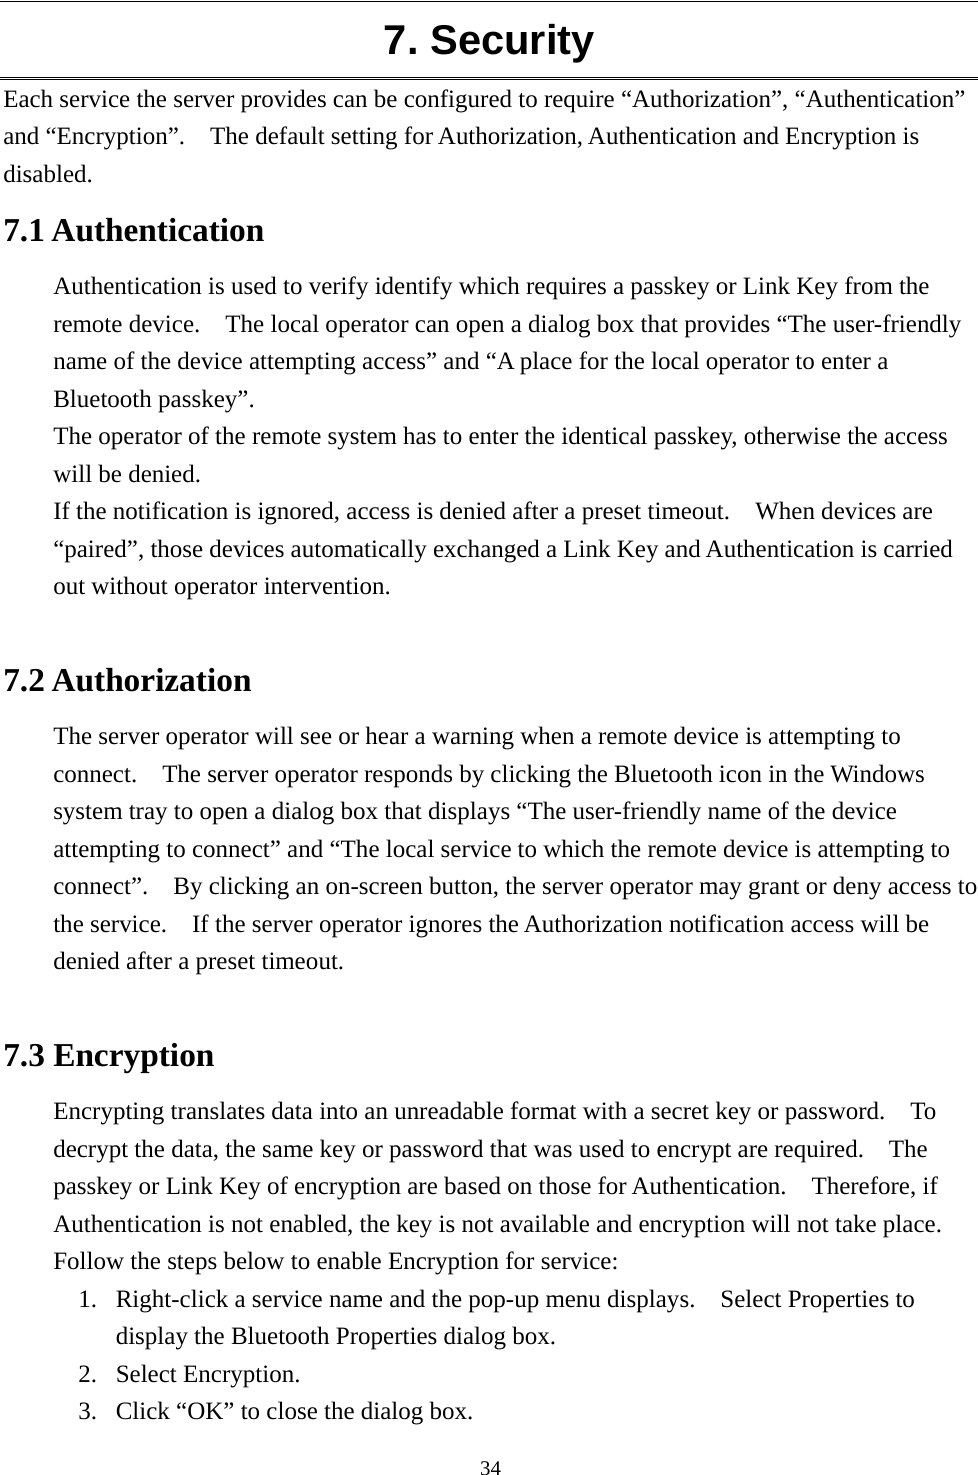   34 7. Security Each service the server provides can be configured to require “Authorization”, “Authentication” and “Encryption”.    The default setting for Authorization, Authentication and Encryption is disabled. 7.1 Authentication Authentication is used to verify identify which requires a passkey or Link Key from the remote device.    The local operator can open a dialog box that provides “The user-friendly name of the device attempting access” and “A place for the local operator to enter a Bluetooth passkey”. The operator of the remote system has to enter the identical passkey, otherwise the access will be denied. If the notification is ignored, access is denied after a preset timeout.    When devices are “paired”, those devices automatically exchanged a Link Key and Authentication is carried out without operator intervention.  7.2 Authorization The server operator will see or hear a warning when a remote device is attempting to connect.    The server operator responds by clicking the Bluetooth icon in the Windows system tray to open a dialog box that displays “The user-friendly name of the device attempting to connect” and “The local service to which the remote device is attempting to connect”.    By clicking an on-screen button, the server operator may grant or deny access to the service.    If the server operator ignores the Authorization notification access will be denied after a preset timeout.  7.3 Encryption Encrypting translates data into an unreadable format with a secret key or password.    To decrypt the data, the same key or password that was used to encrypt are required.    The passkey or Link Key of encryption are based on those for Authentication.  Therefore, if Authentication is not enabled, the key is not available and encryption will not take place. Follow the steps below to enable Encryption for service: 1.  Right-click a service name and the pop-up menu displays.    Select Properties to display the Bluetooth Properties dialog box. 2.  Select Encryption.   3.  Click “OK” to close the dialog box. 